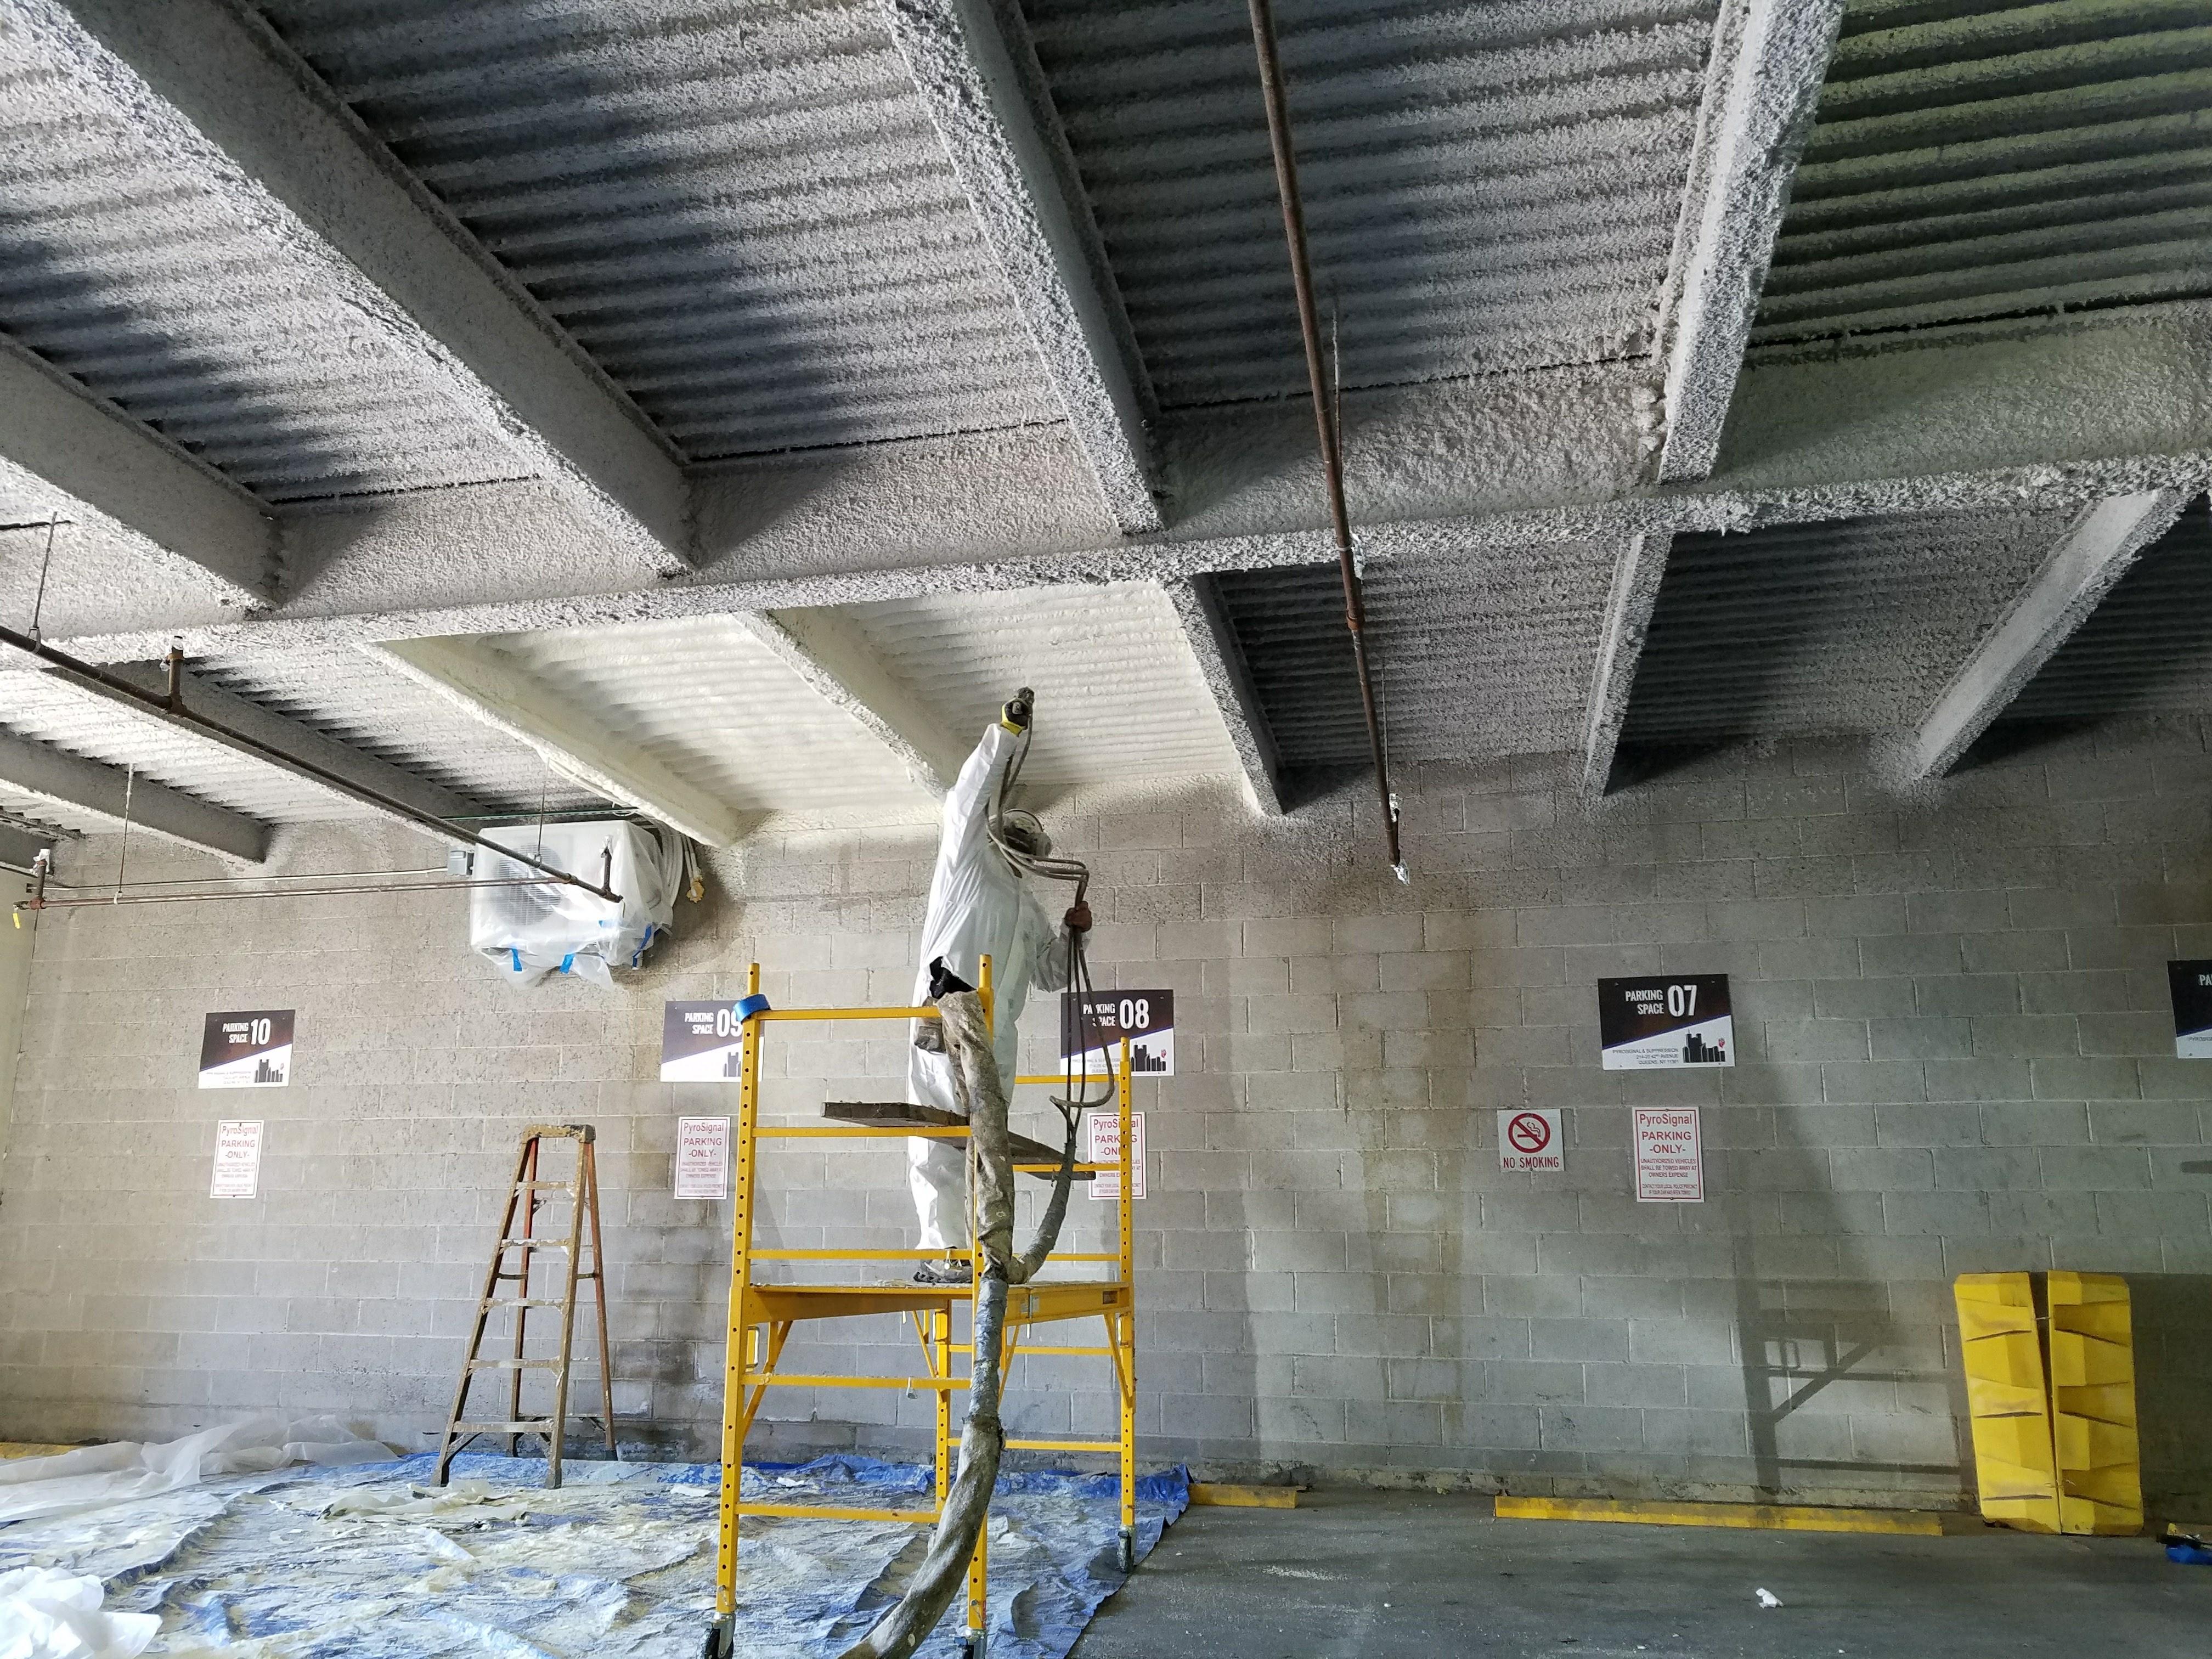 Condo Parking Garage Ceiling 42nd Ave Bayside Ny 11361